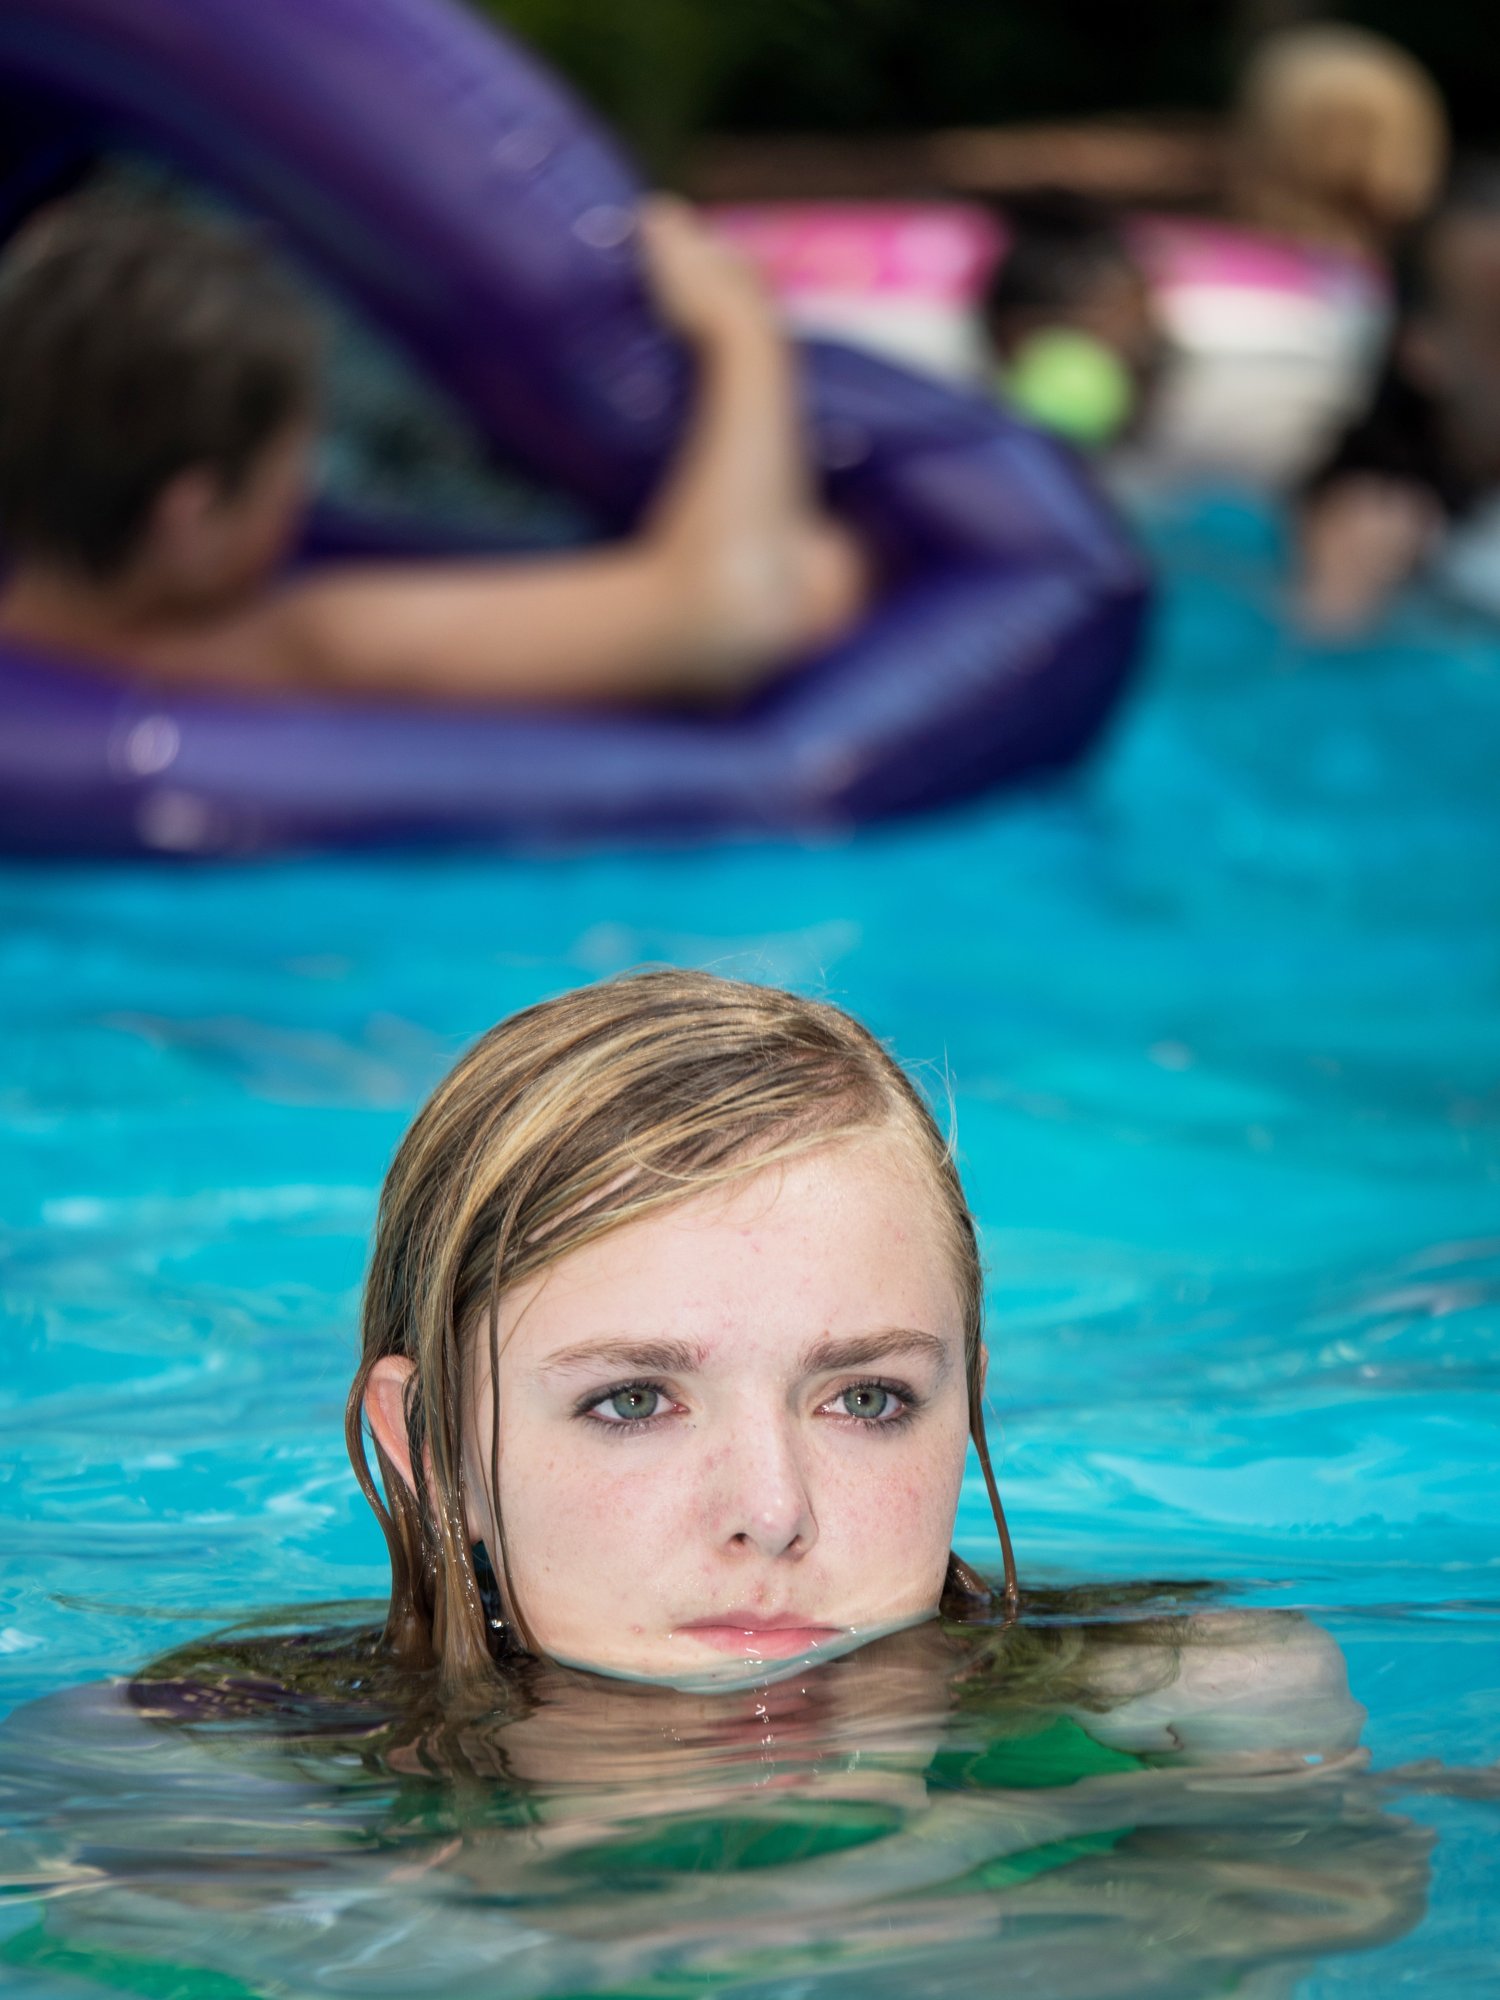 Elsie Fisher stars as Kayla in A24's Eighth Grade (2018)